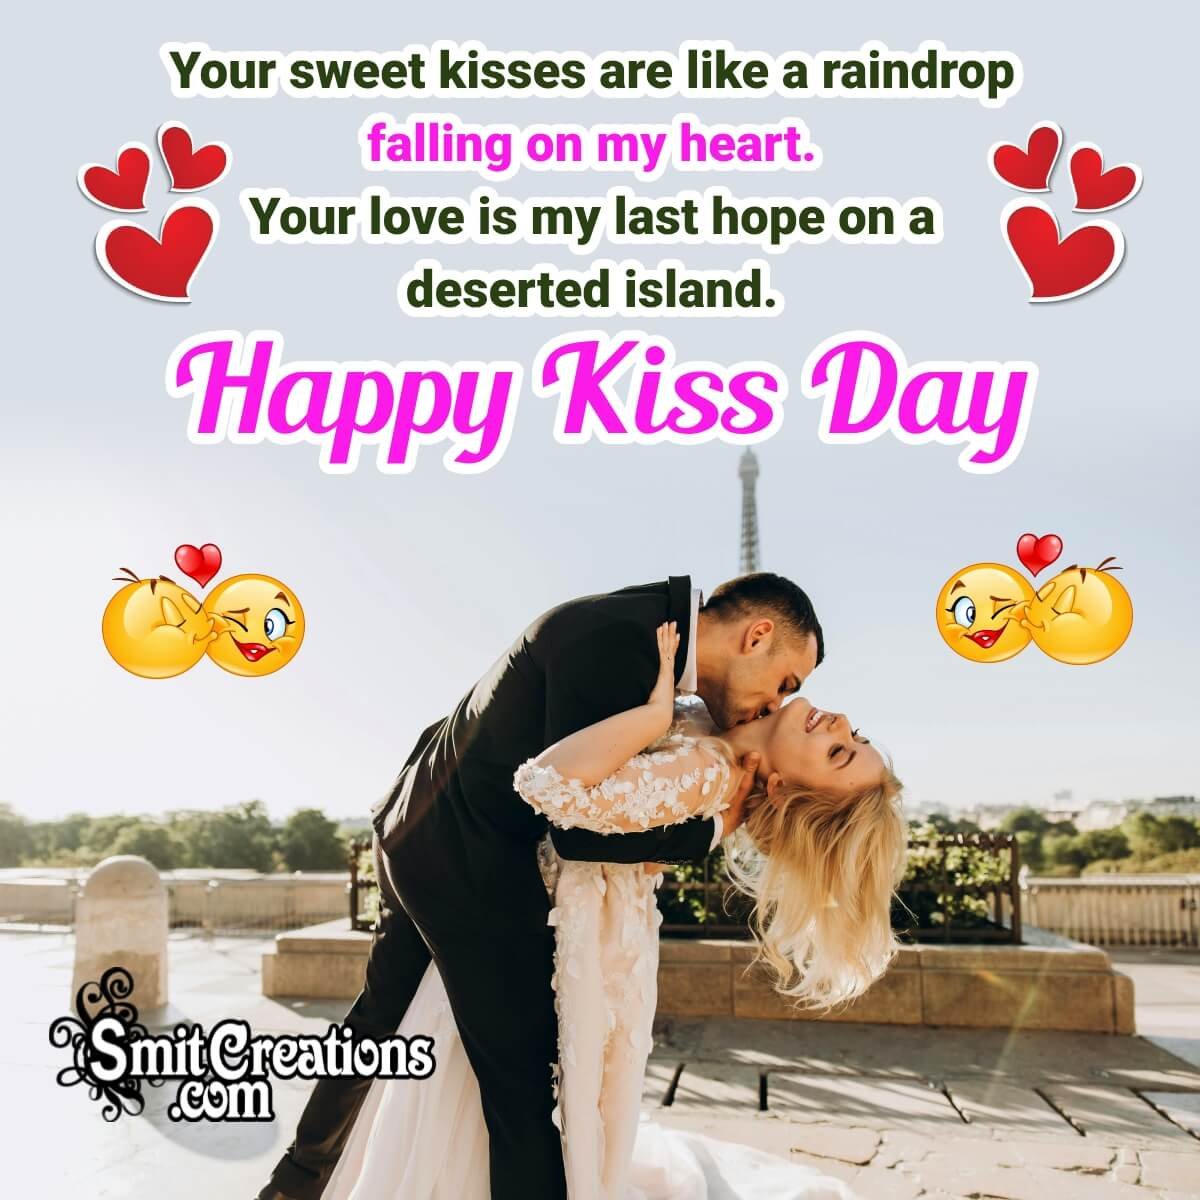 Happy Kiss Day Wishes For Him